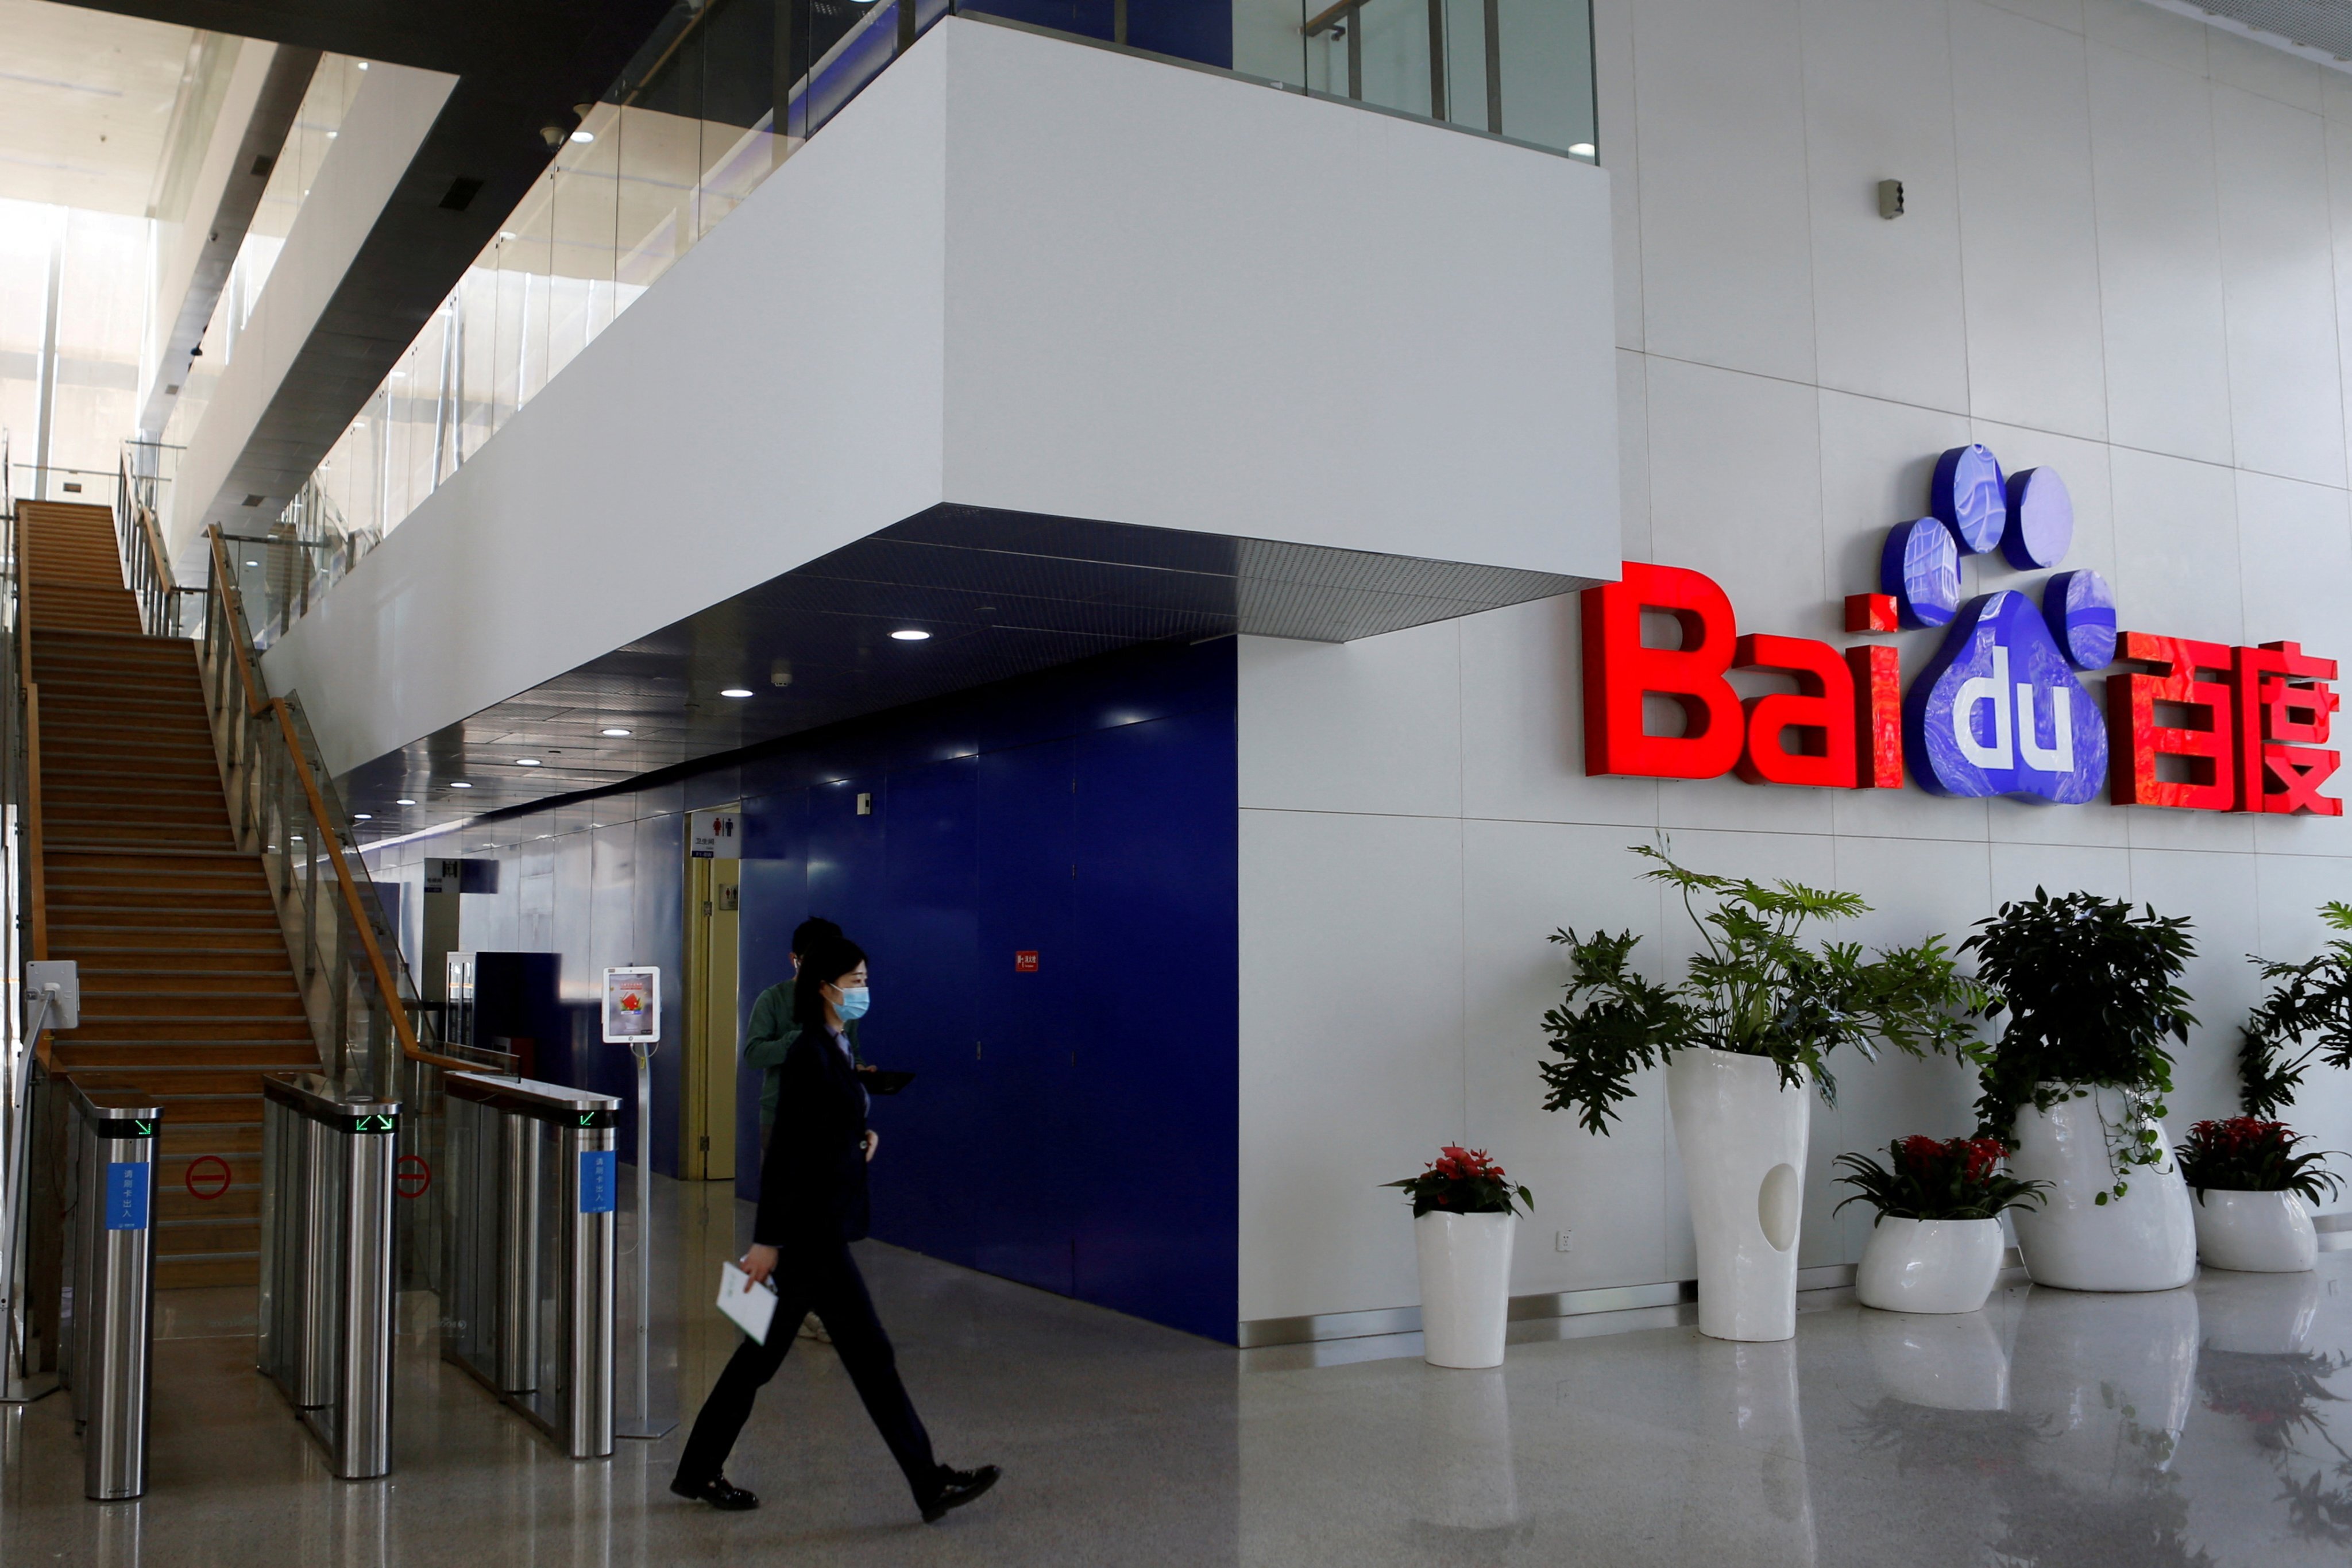 Baidu’s logo at the company headquarters in Beijing on April 23, 2021. Photo: Reuters